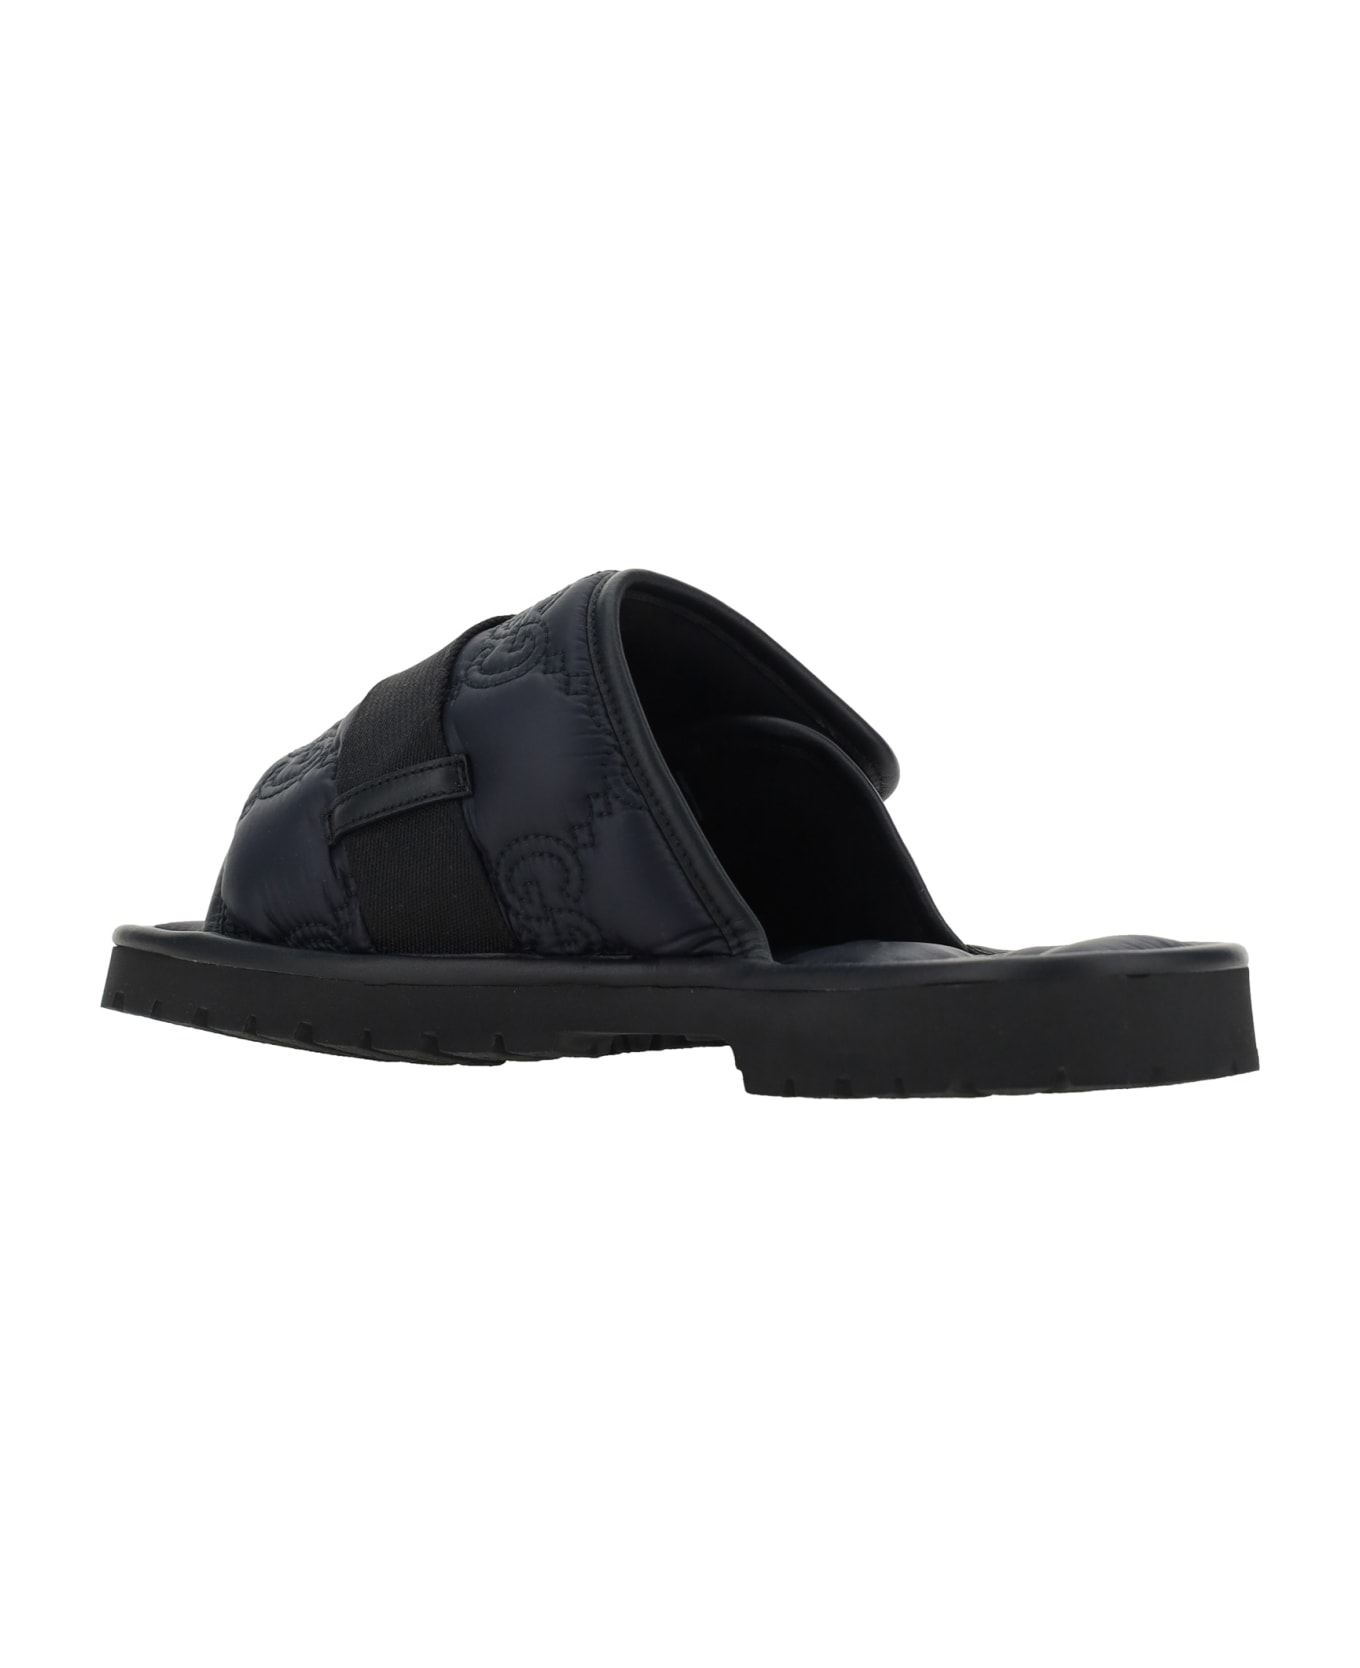 Gucci Gg Sandals - Nero その他各種シューズ